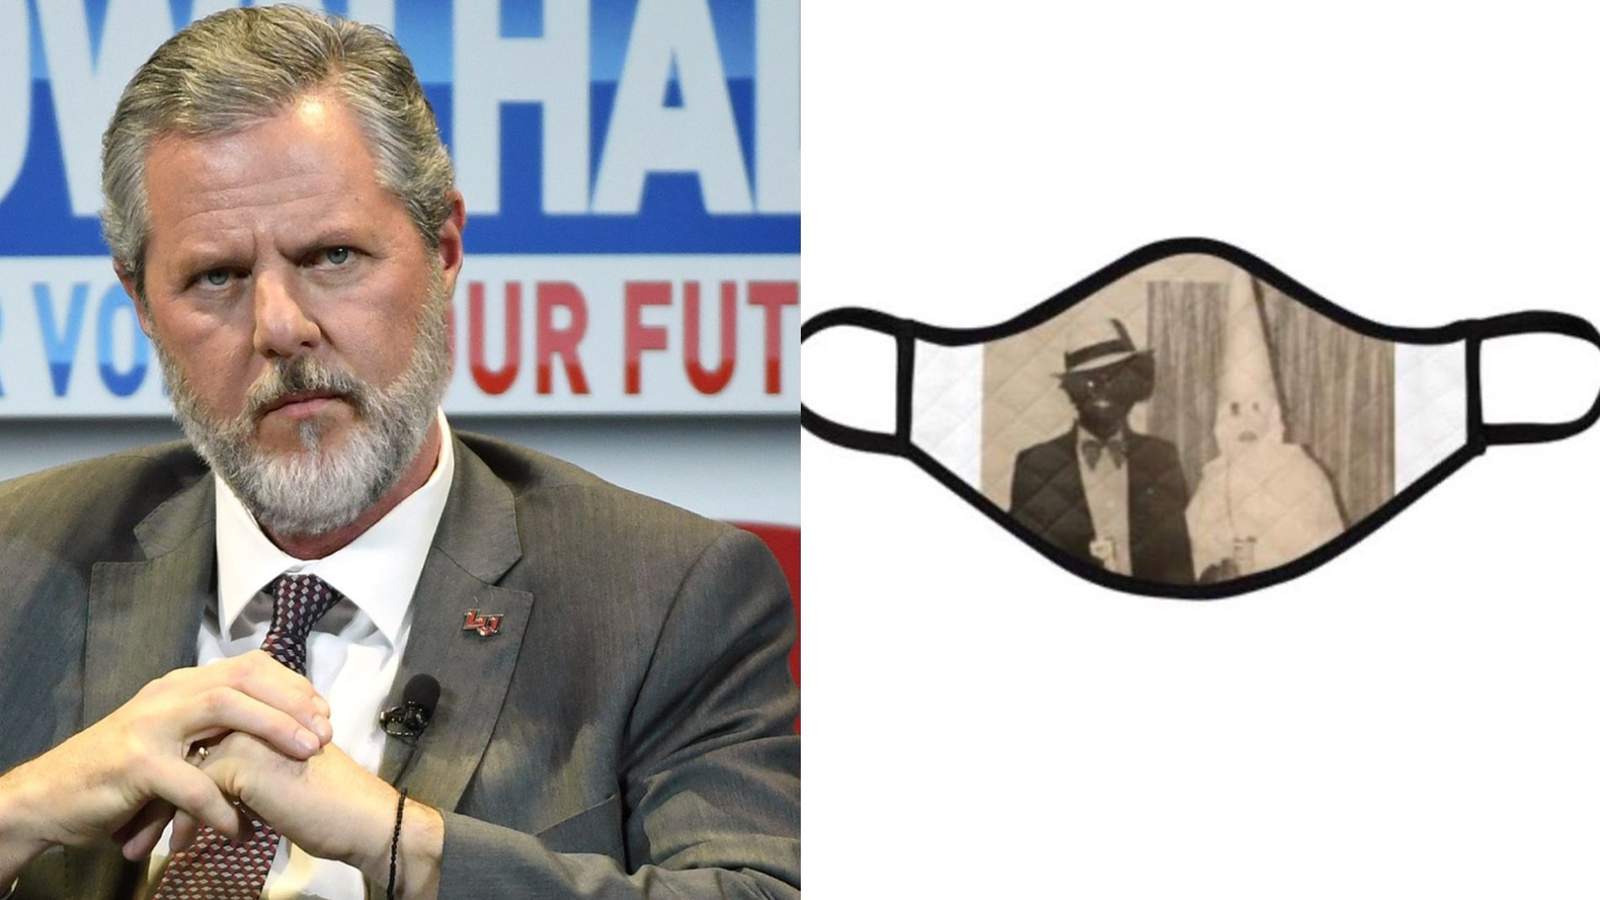 35,000+ sign petition asking Libertys Jerry Falwell to apologize for mask tweet